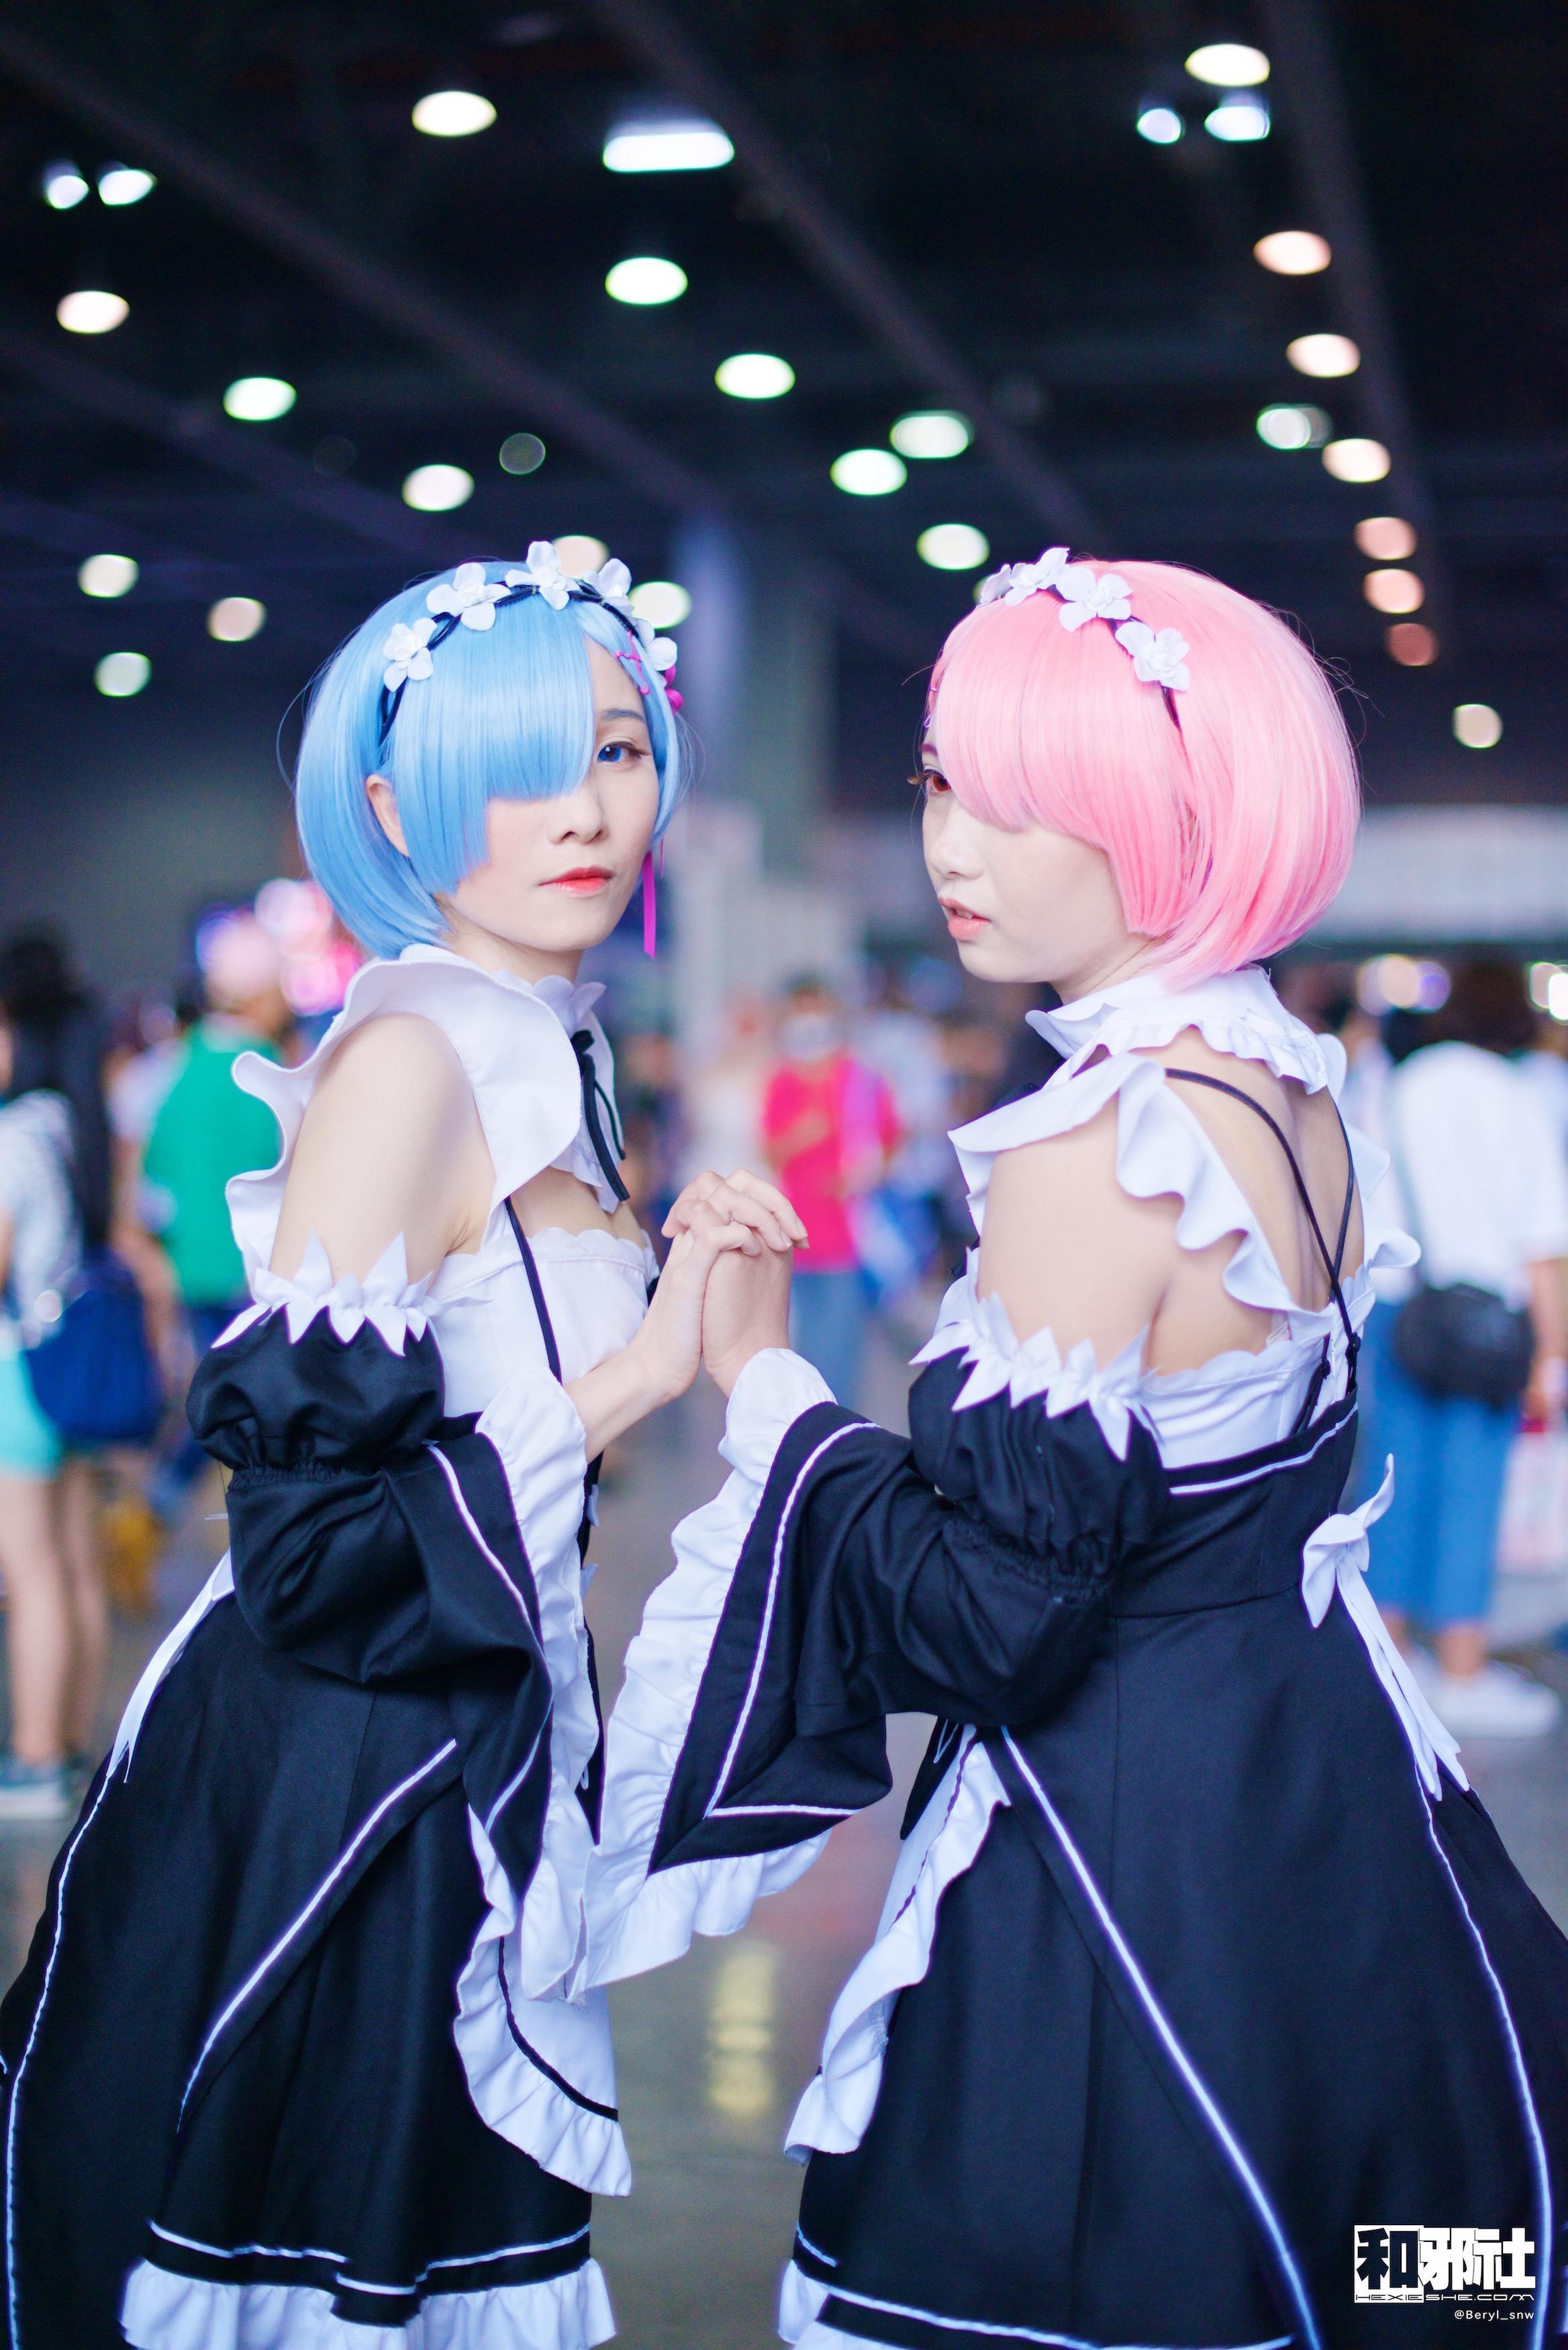 Anime Cosplay 4K Wallpapers for Android - APK Download